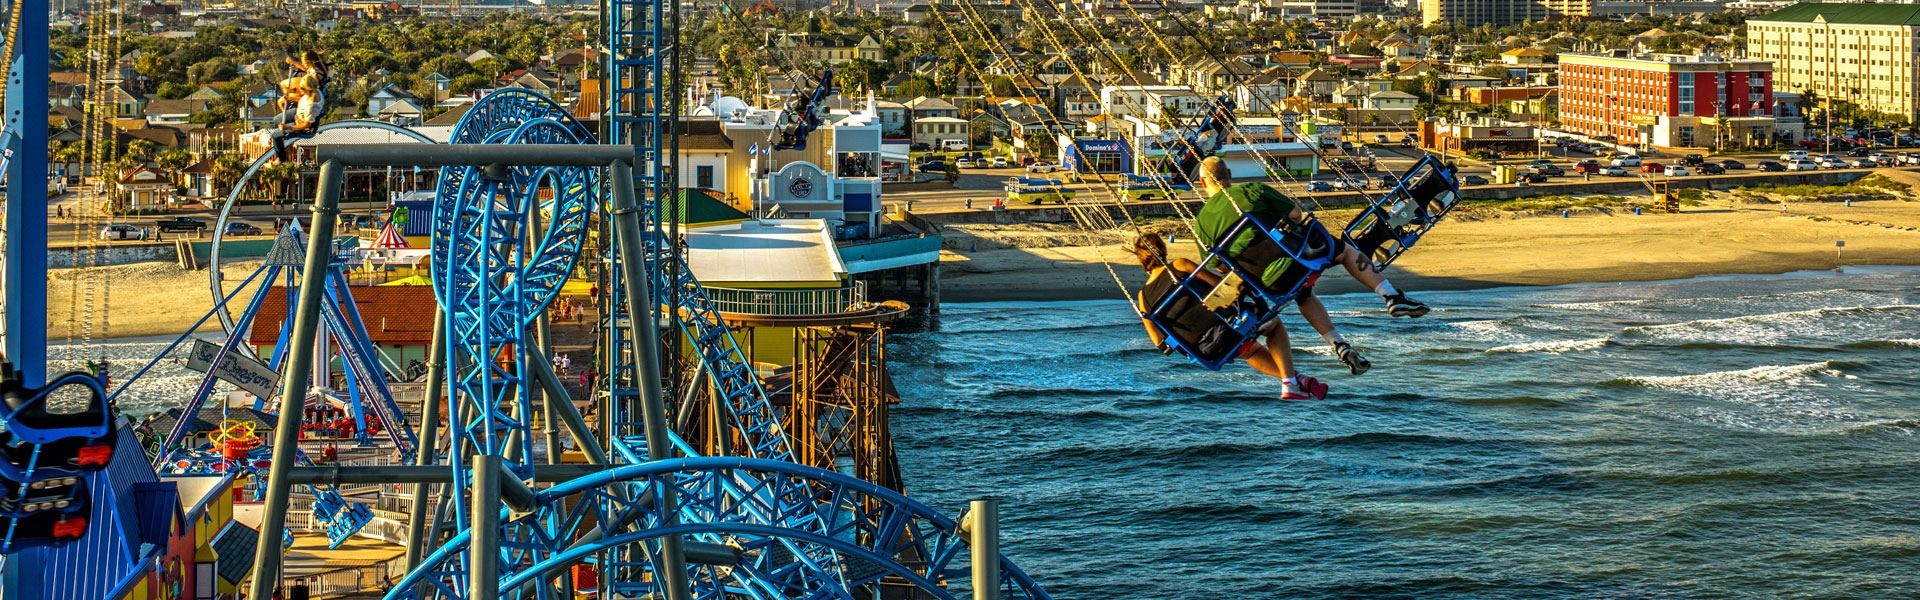 Flying Over the Gulf at Pleasure Pier, Galveston, TX